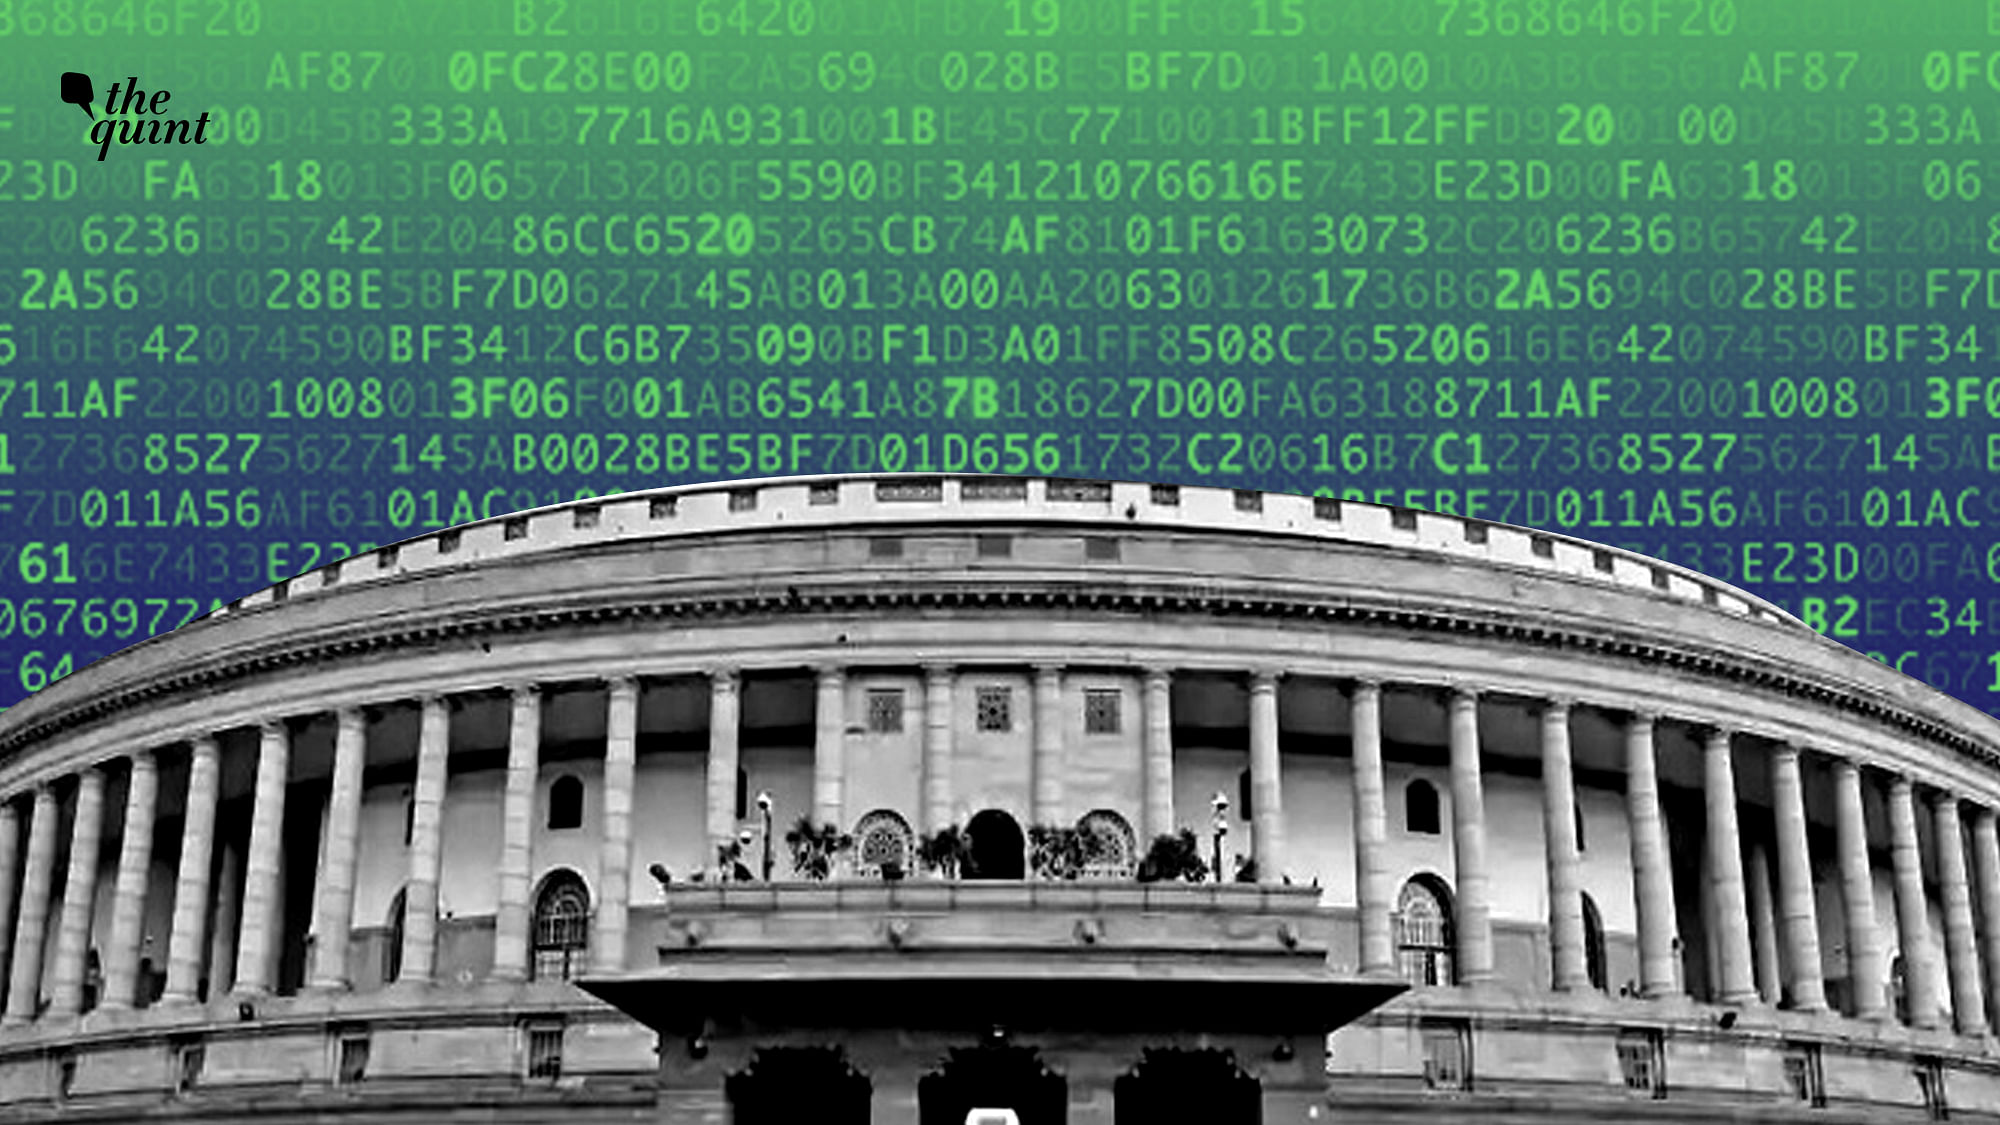 The report, “Digital Rights in India’s Parliament: Five Years in Review” released by Access Now, captures a snapshot of how the Lok Sabha and Rajya Sabha have engaged with issues of privacy.